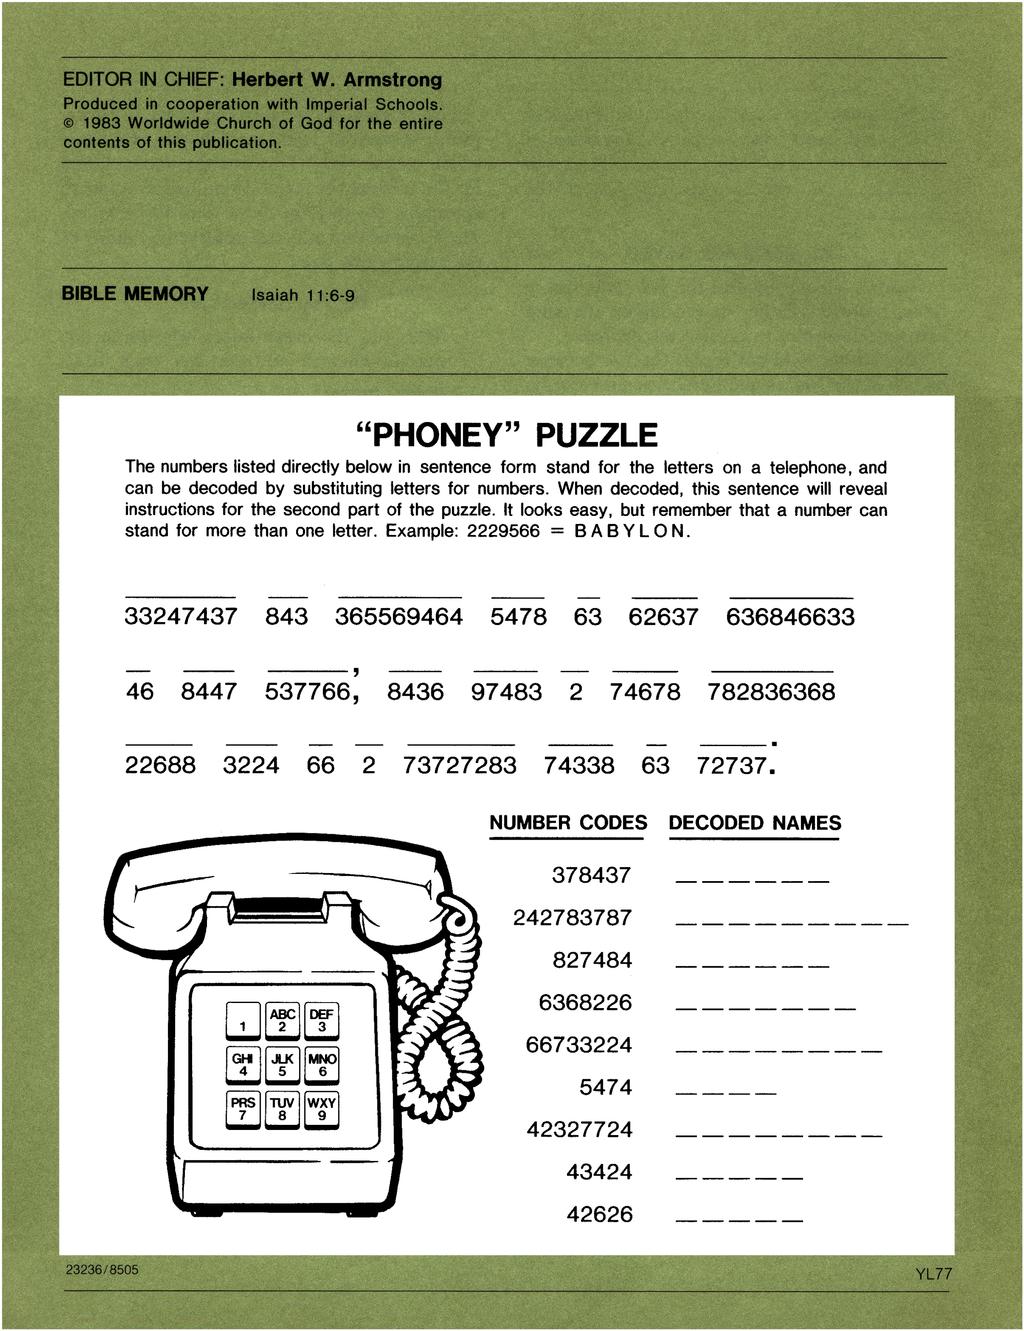 "PHONEY" PUZZLE The numbers listed directly below in sentence form stand for the letters on a telephone, and can be decoded by substituting letters for numbers.